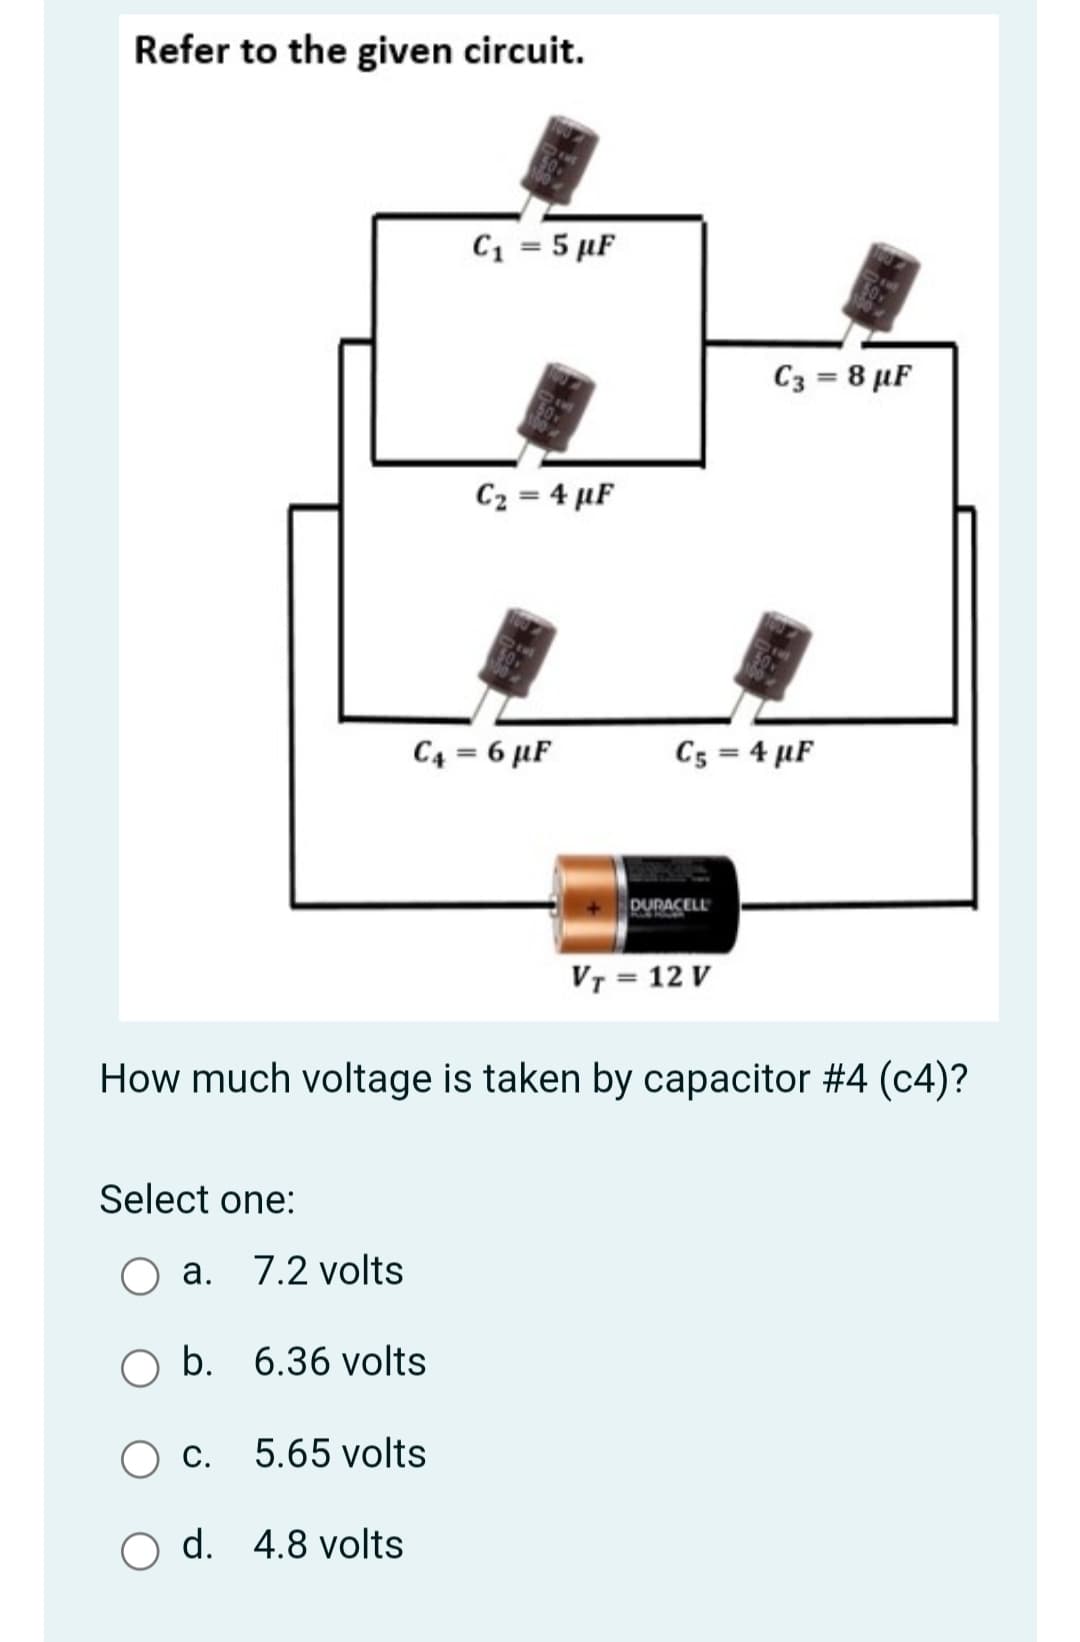 Refer to the given circuit.
C1 = 5 µF
C3 = 8 µF
C2 = 4 µF
C4 = 6 µF
C5 = 4 µF
DURACELL
VT = 12 V
How much voltage is taken by capacitor #4 (c4)?
Select one:
a. 7.2 volts
b. 6.36 volts
O c.
5.65 volts
O d. 4.8 volts
